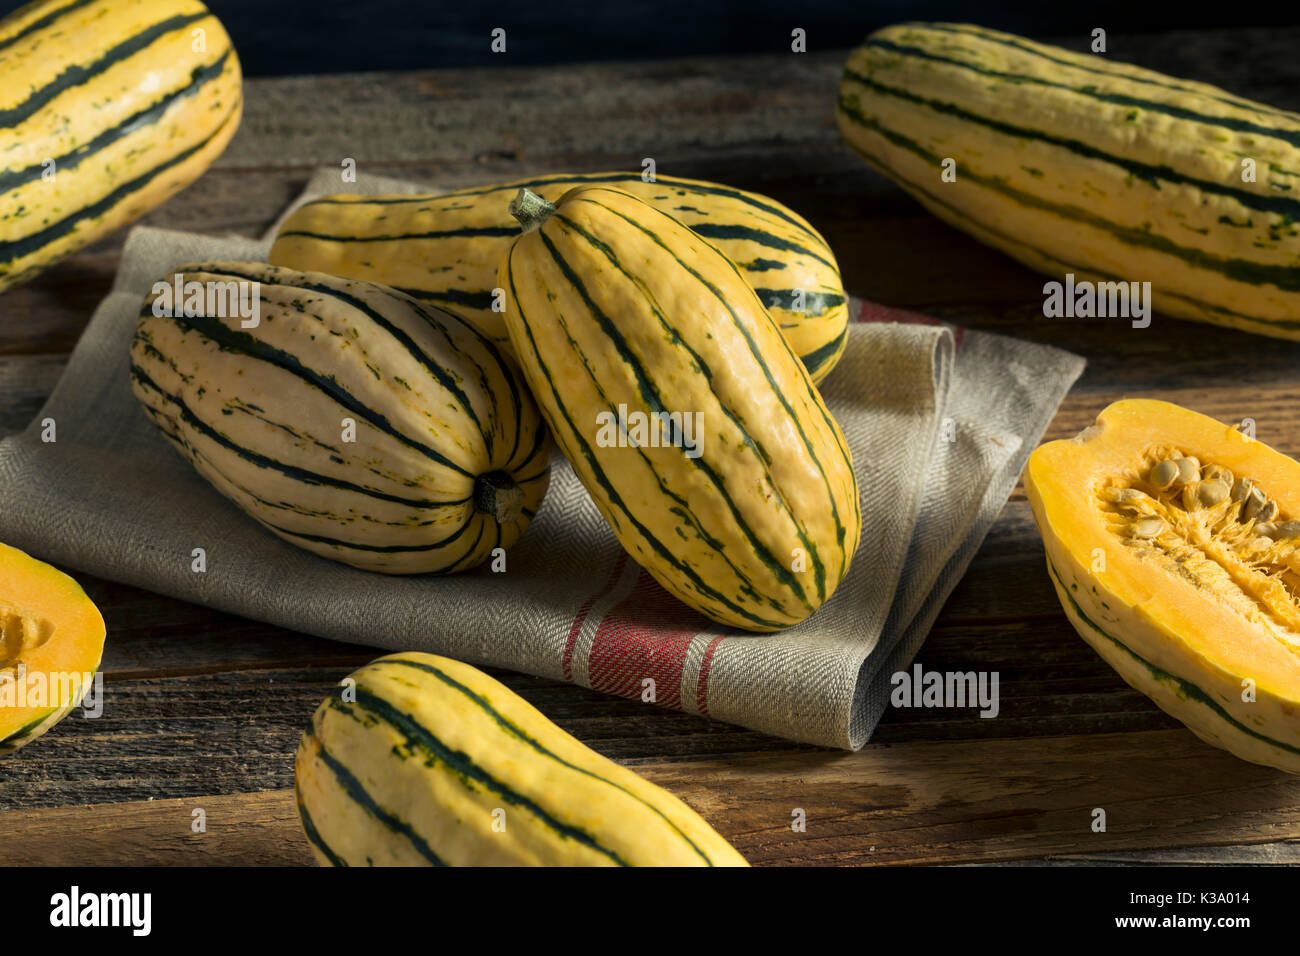 Raw Organic Delicata Squash Ready to Cook With Stock Photo